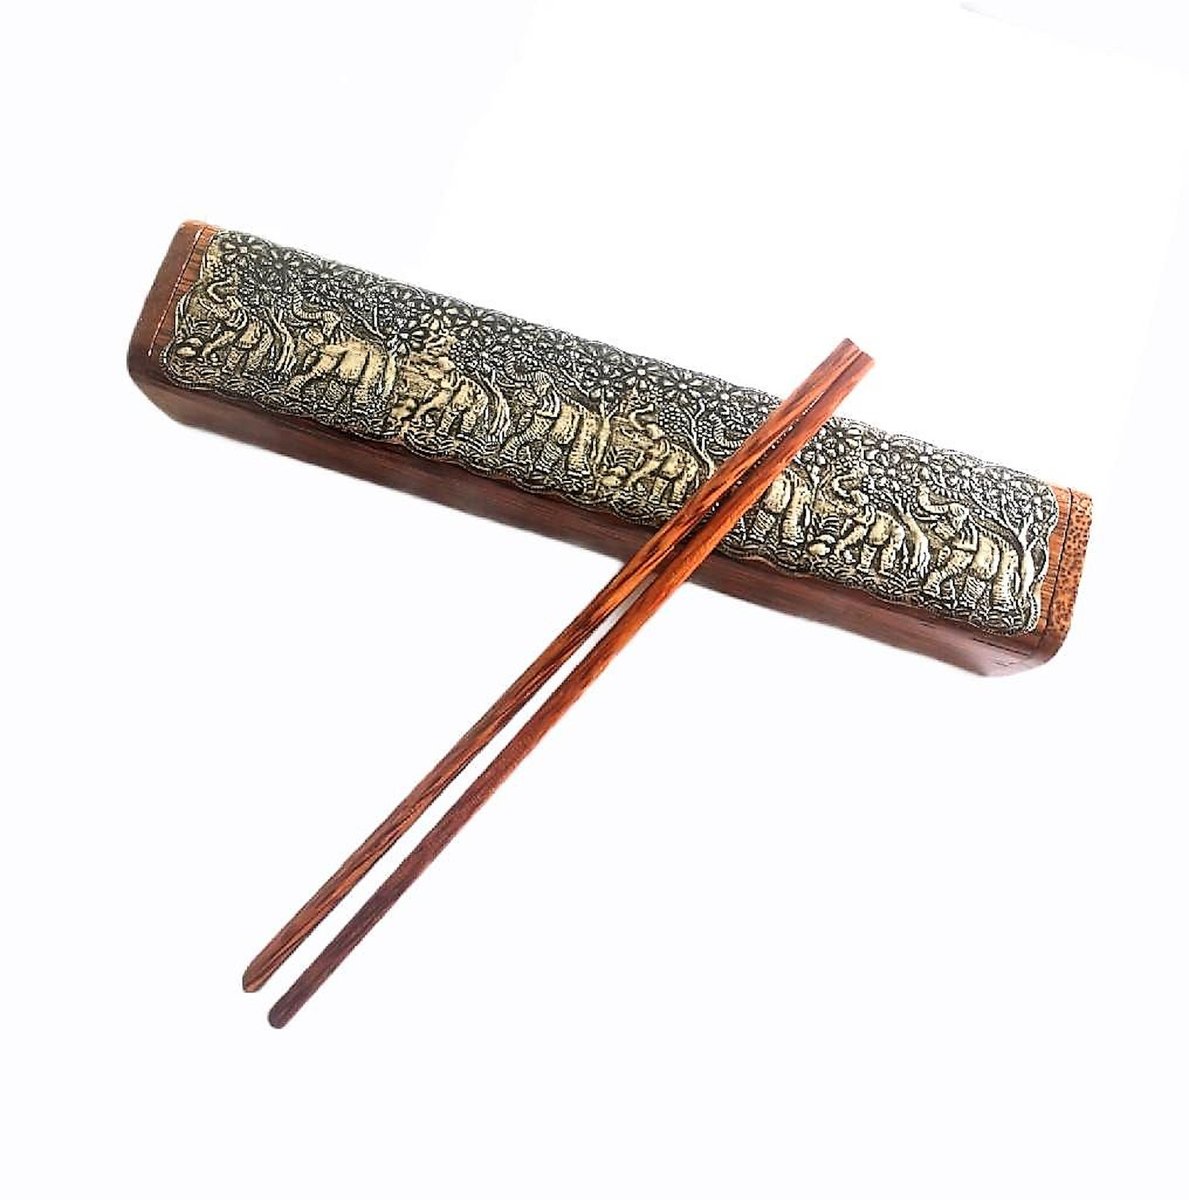 Excited to share the latest addition to my #etsy shop: Chopsticks 'Takiap' from Thailand handmade from Palm wood in a wooden case. 10 pairs of chopsticks incl. box. etsy.me/3zEk6pE #metal #chopsticks #woodenchopsticks #handmadechopsticks #palmwood #metaldecorat